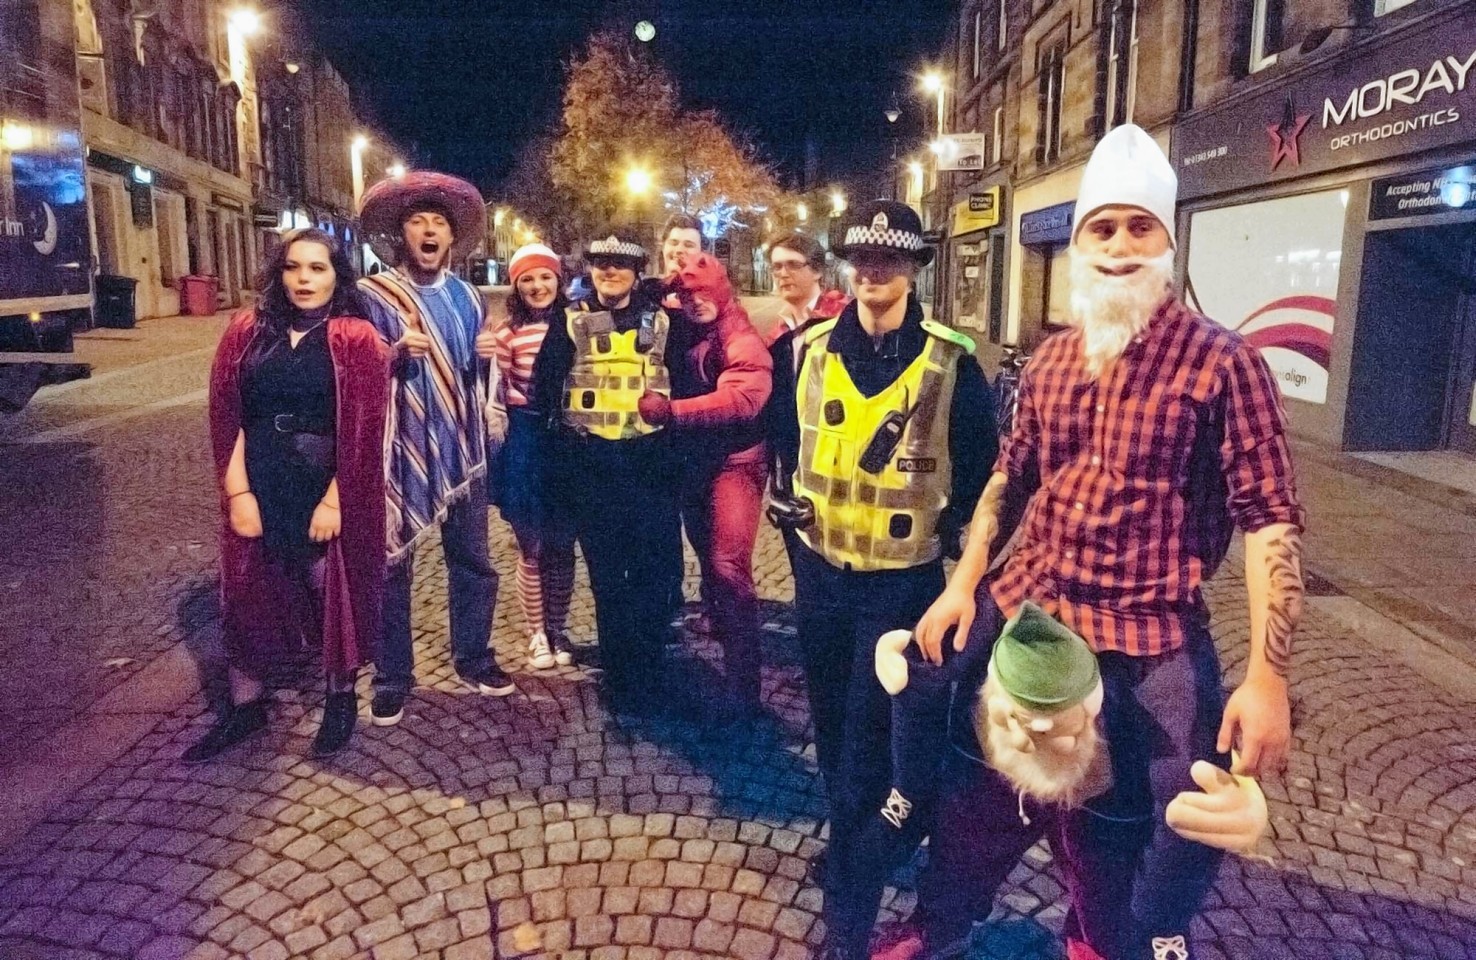 Elgin police praised what was a 'general good vibe' for Halloween weekend